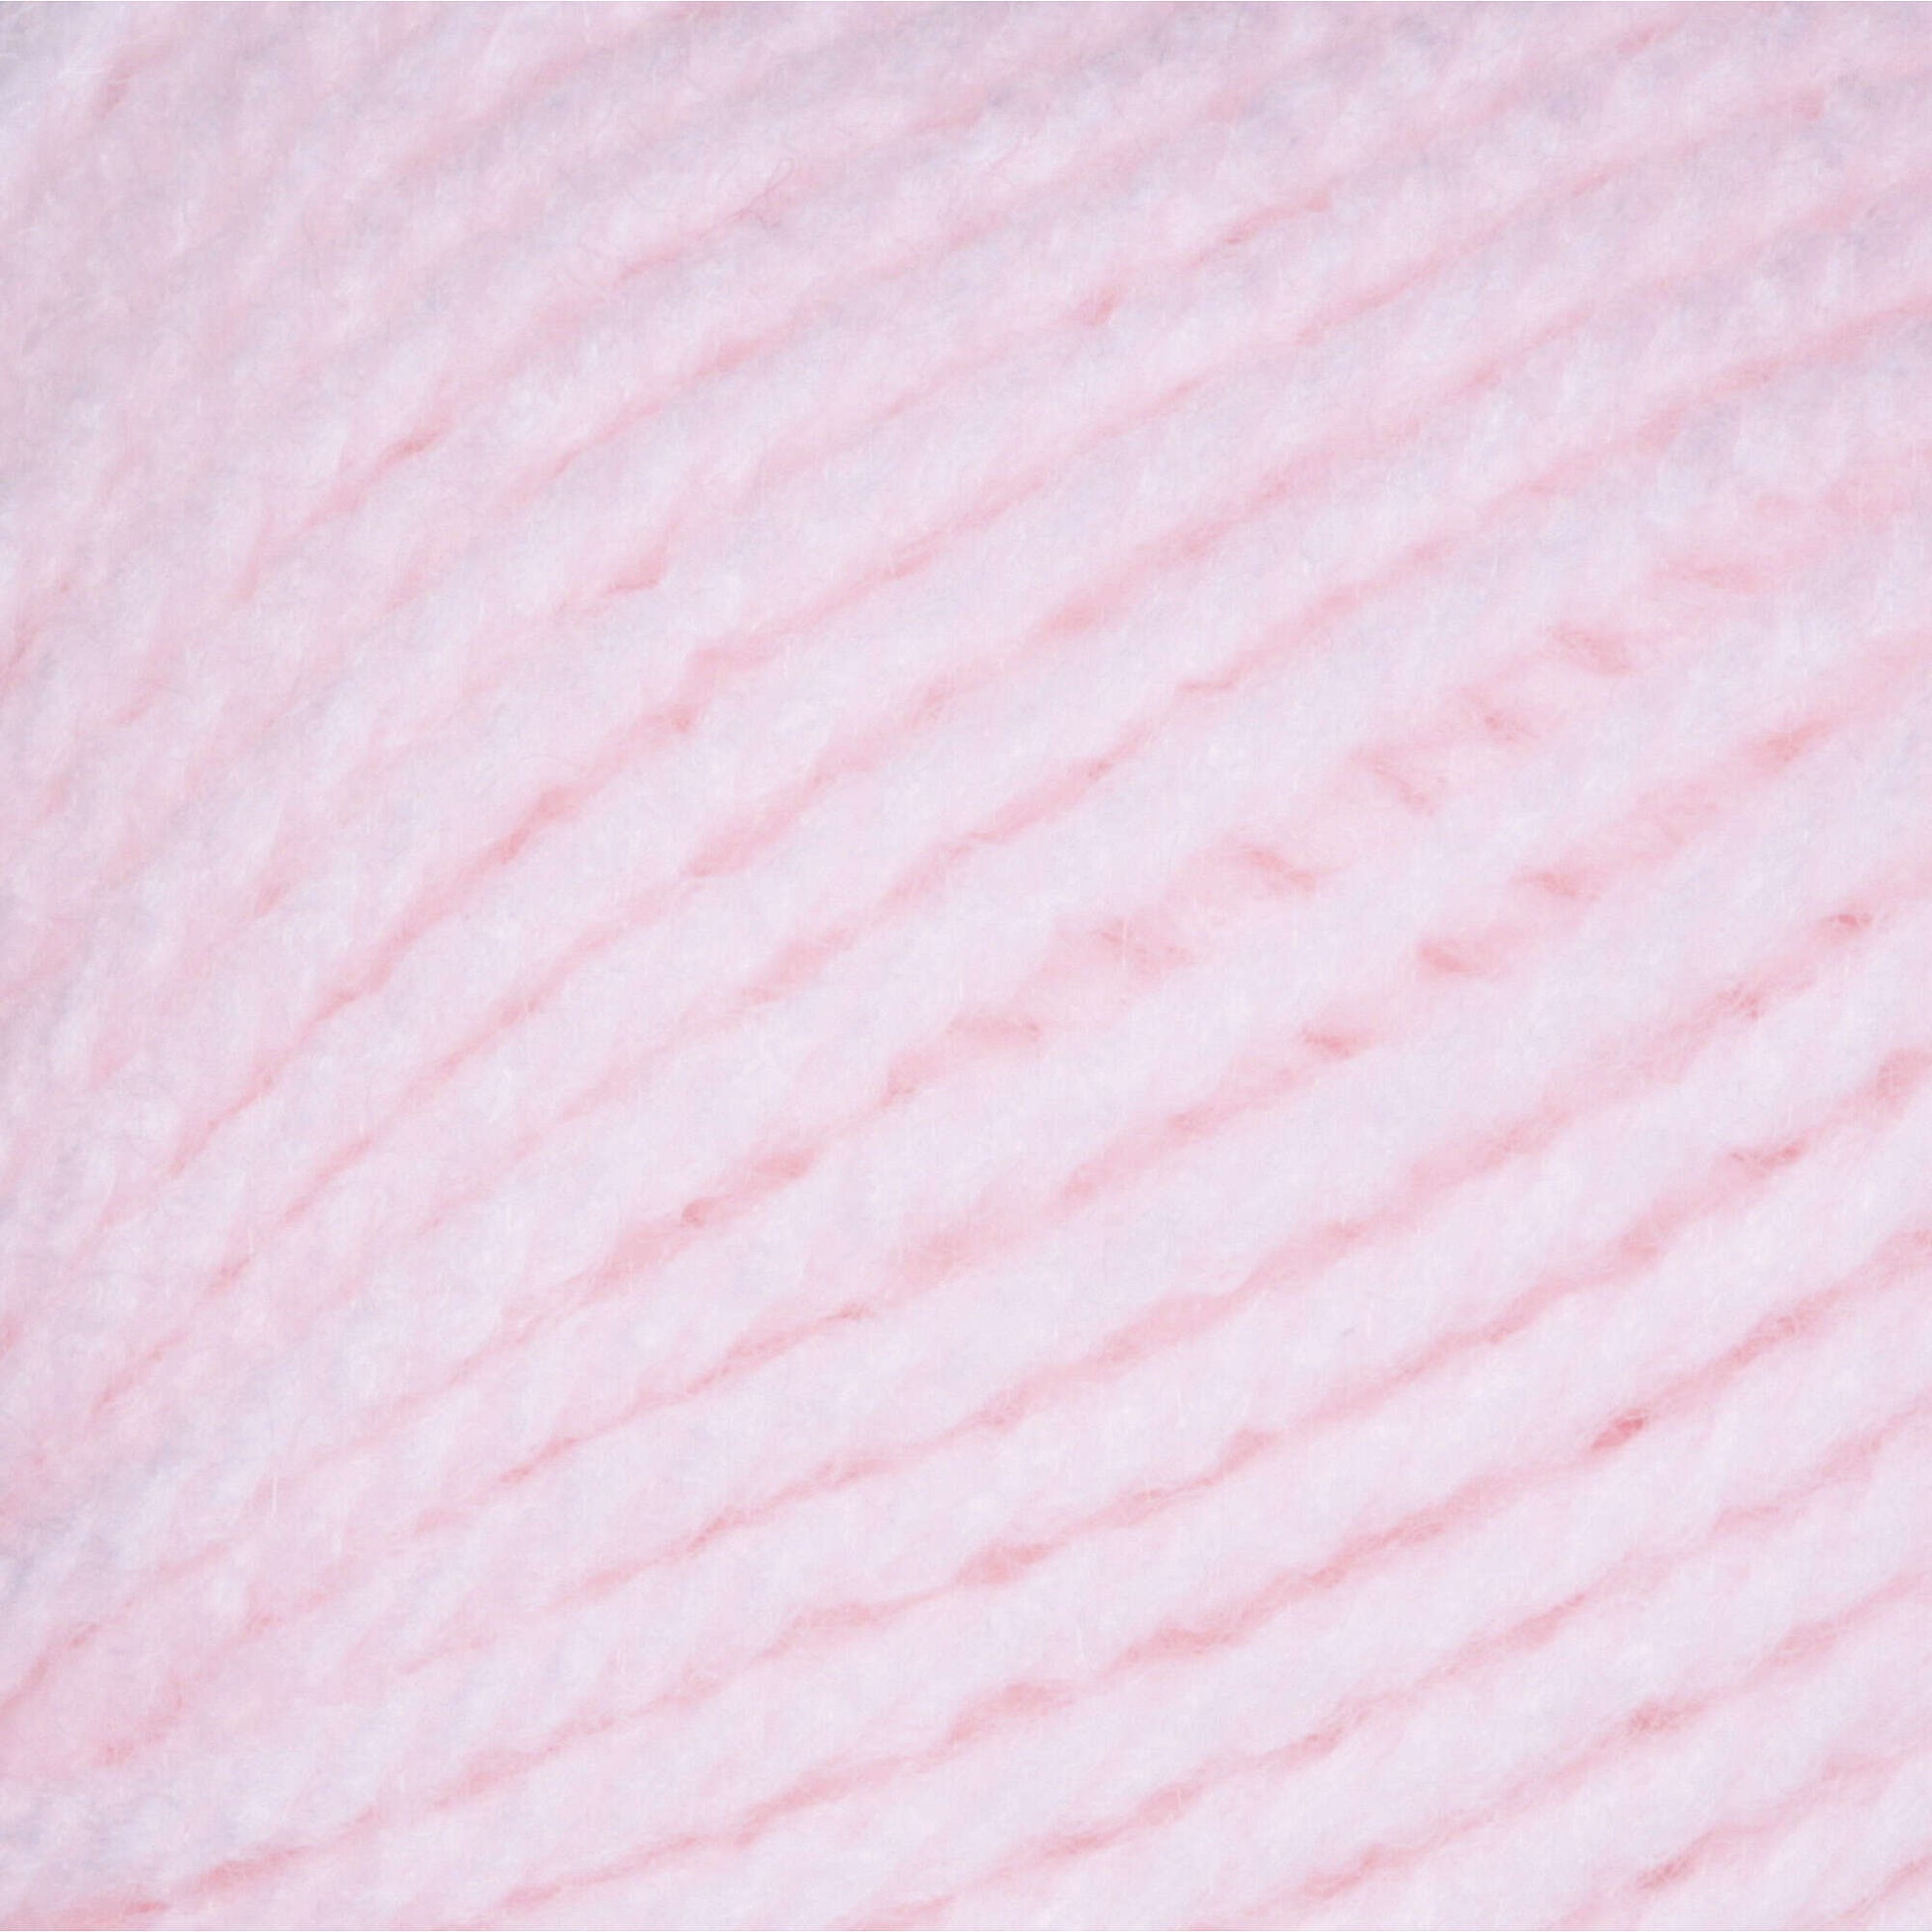 Patons Astra Yarn Baby Pink